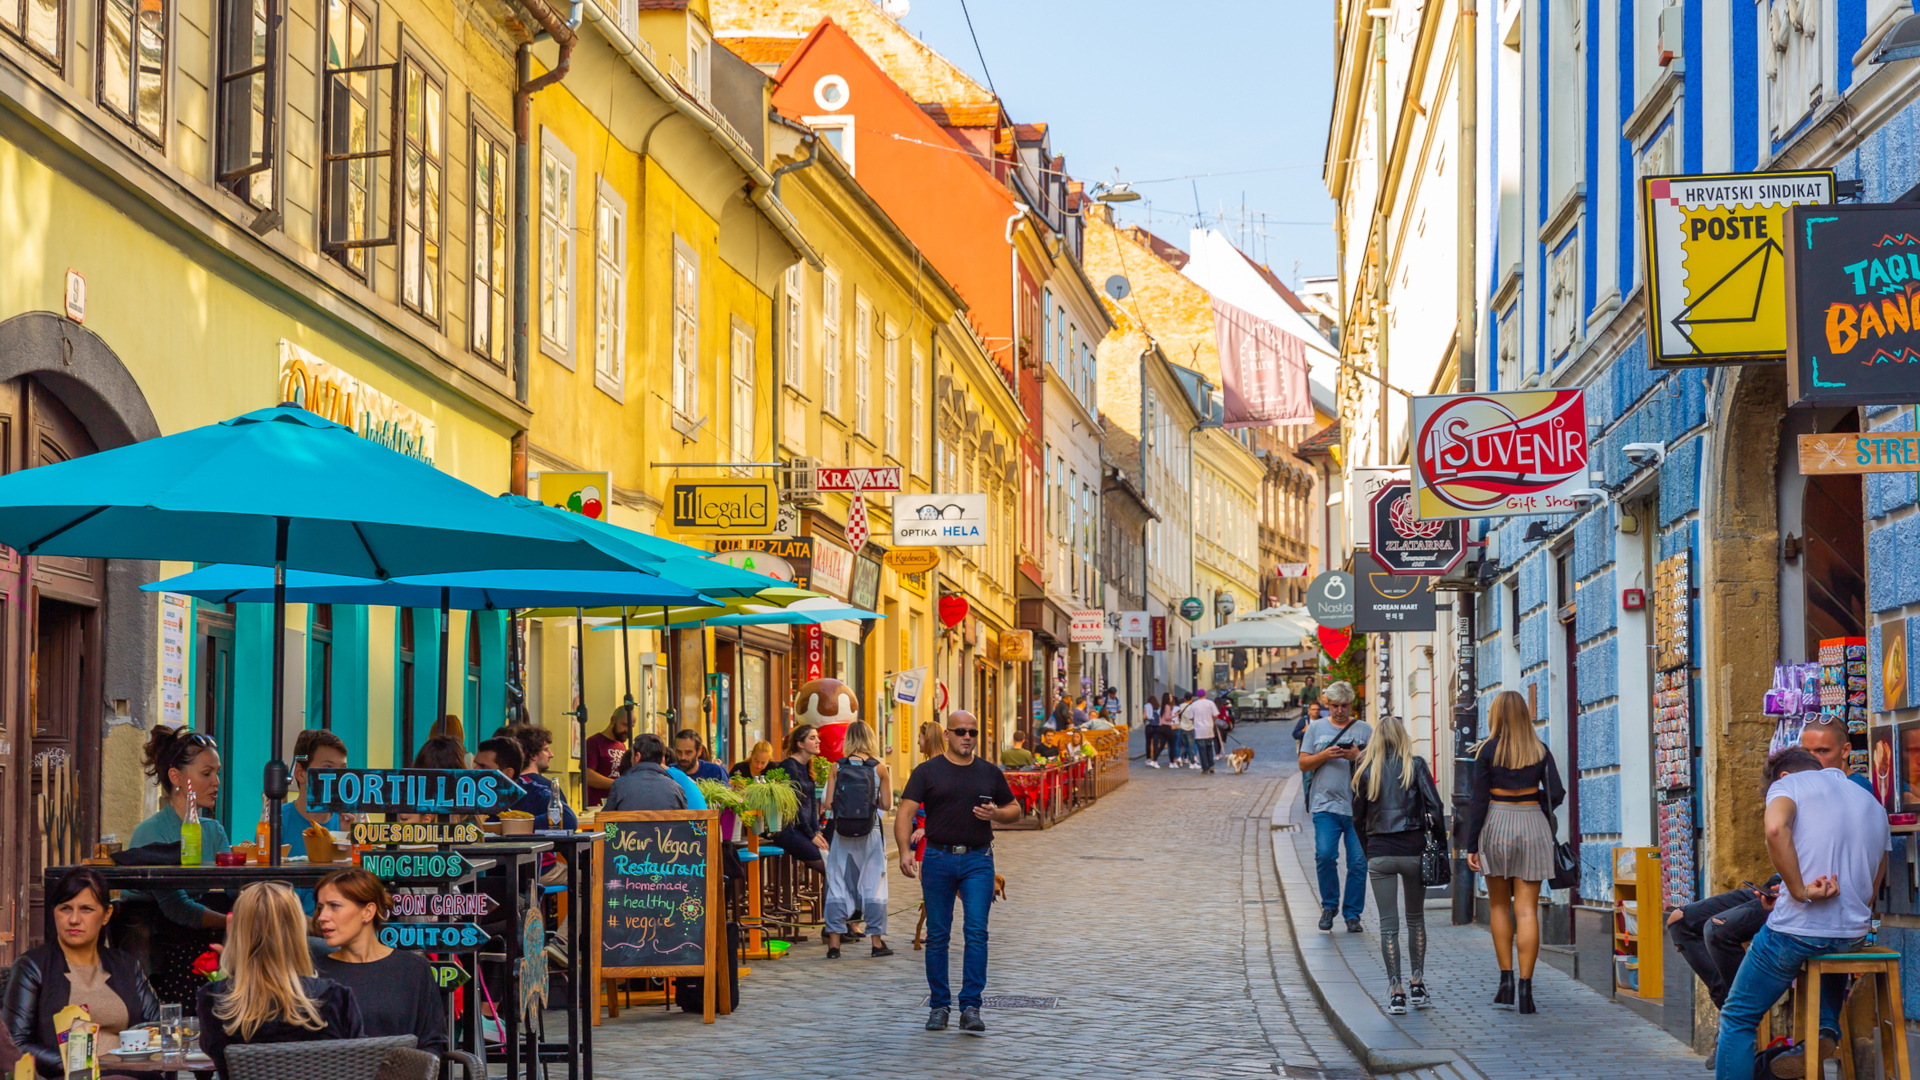 <p>Enjoy fine dining and cultural attractions for cheap when you visit this Baltic destination. The average cost for a three-course dinner for two with a bottle of house wine is $61, and the average cost to visit cultural attractions like museums and heritage sites is $12.50, the Post Office reported.</p>